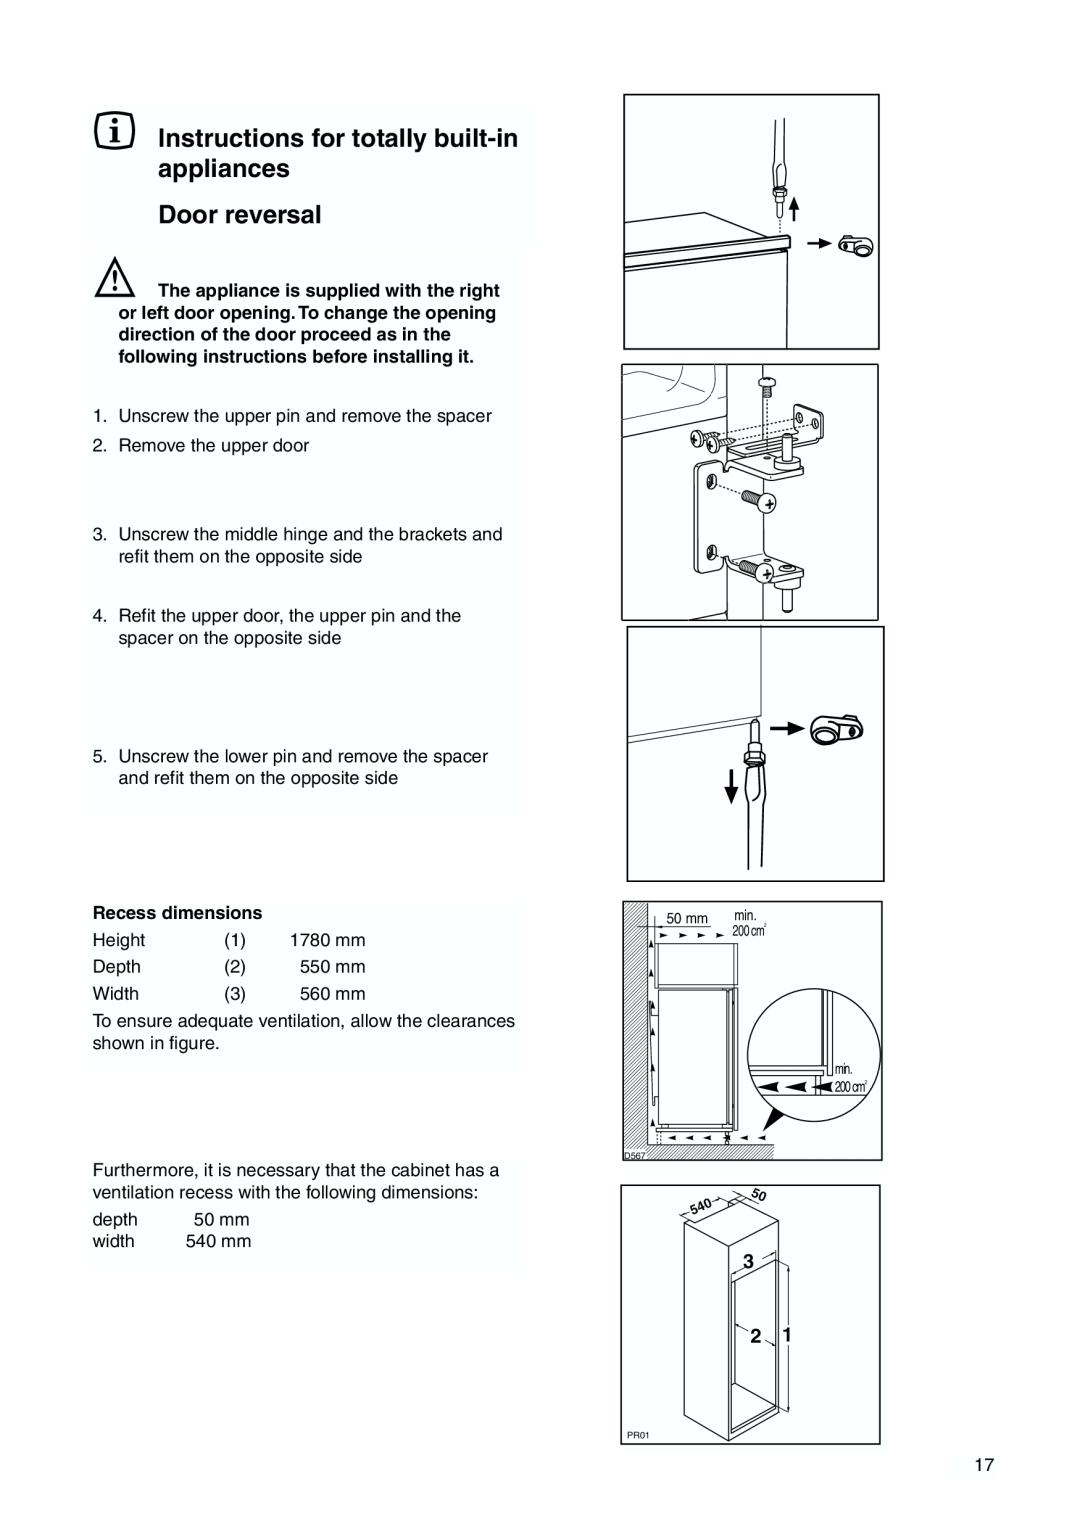 Zanussi ZI 918/9 FFA manual Instructions for totally built-inappliances, Door reversal, Recess dimensions 